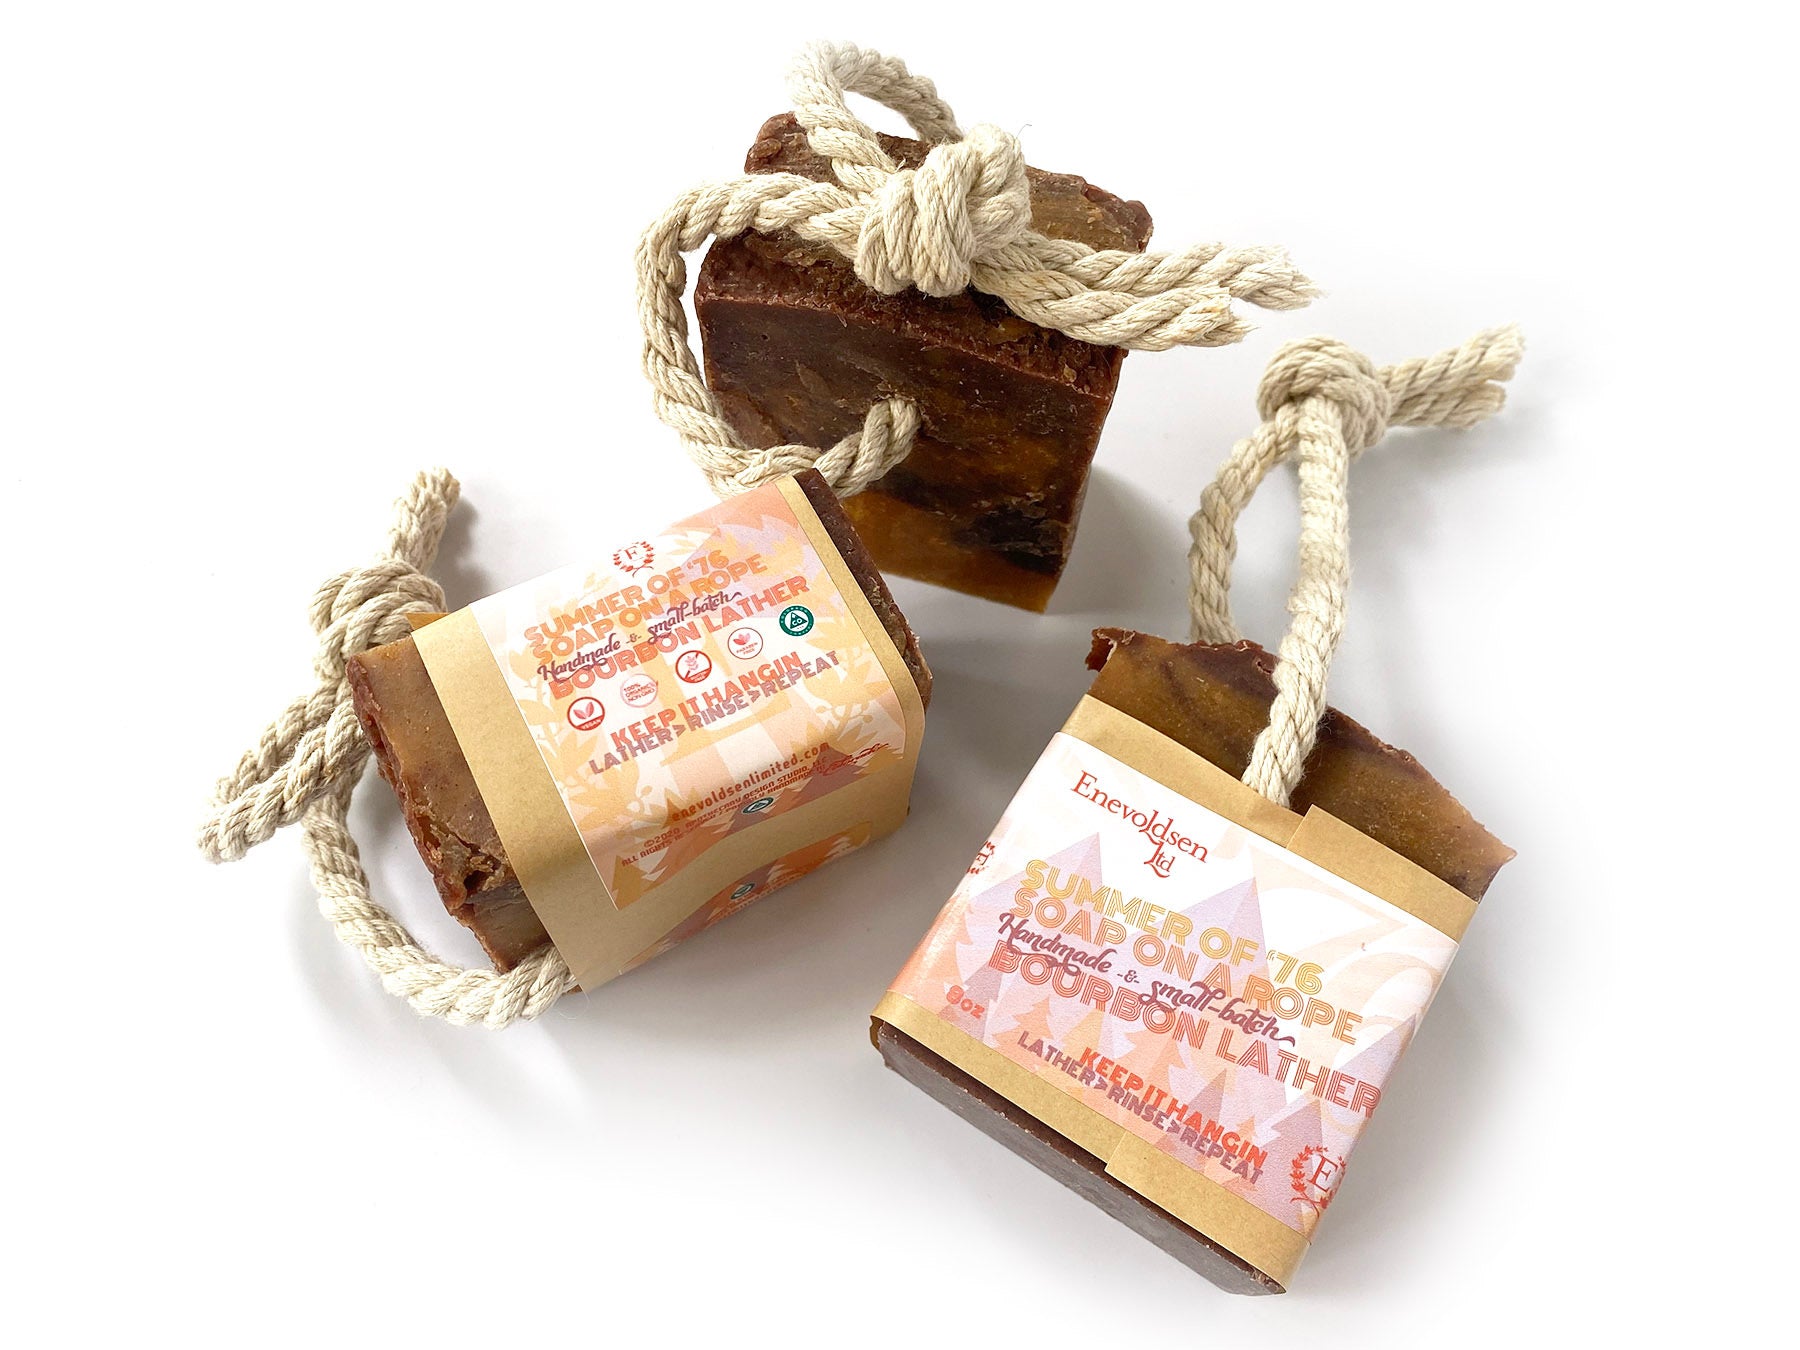 Summer of '76. Soap on a Rope, 8oz - Enevoldsen Limited